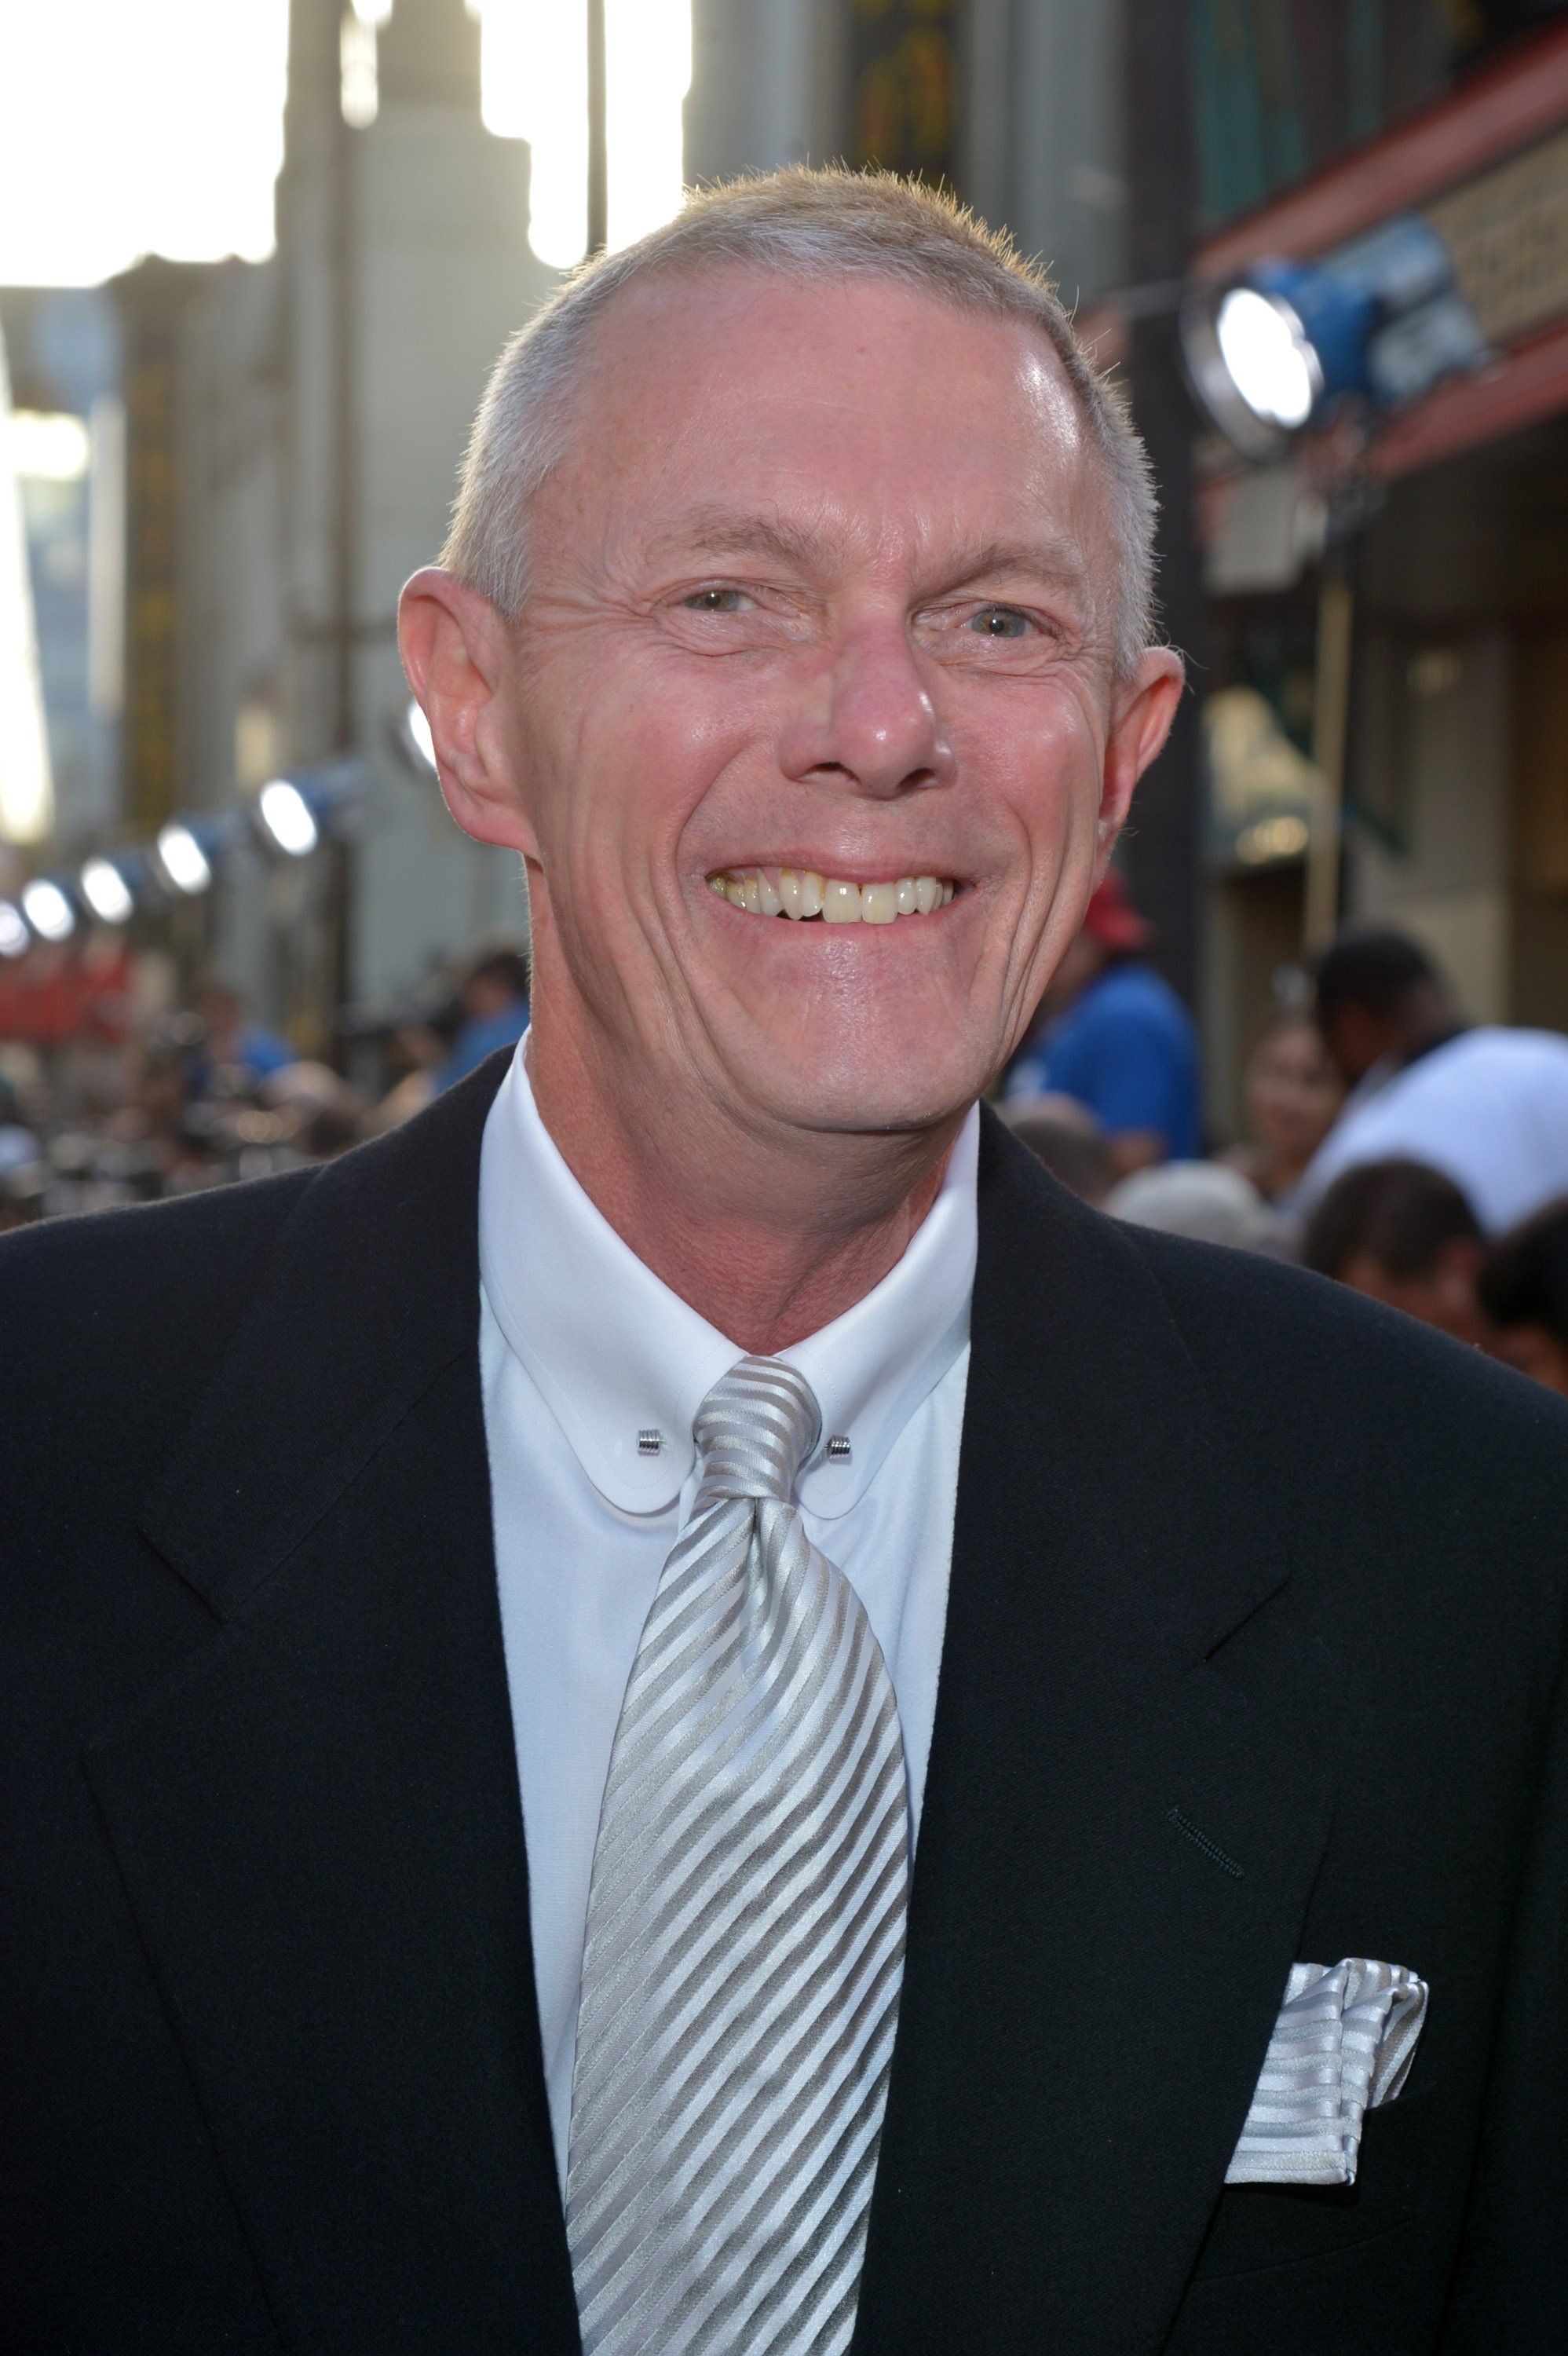 Richard Carpenter arrives at the Los Angeles premiere of "Dark Shadows" held at Grauman's Chinese Theatre on May 7, 2012 in Hollywood, California | Source: Getty Images 